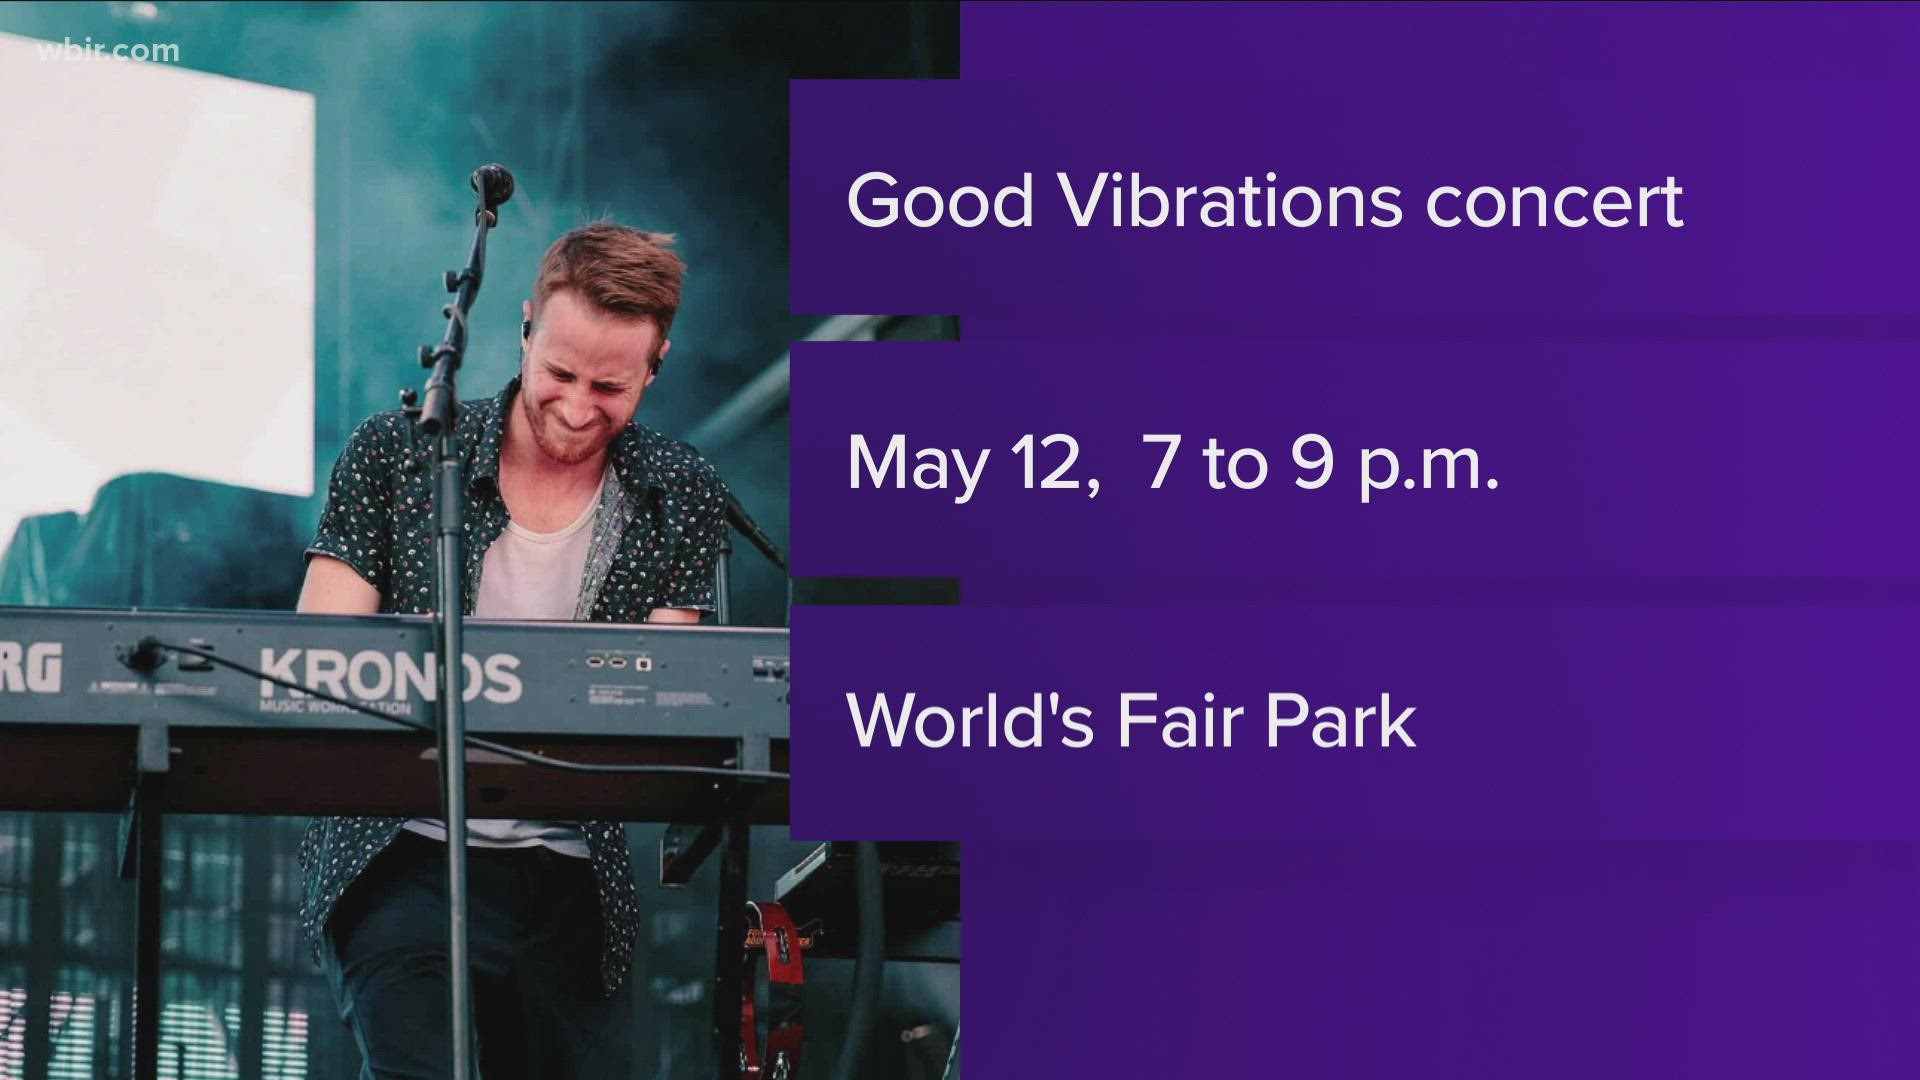 Good Vibrations: Open-air concert for Cancer Support Community of E.T. is May 12 from 7 to 9 p.m. at World's Fair Park, cancersupportet.org. May 4, 2022-4pm.